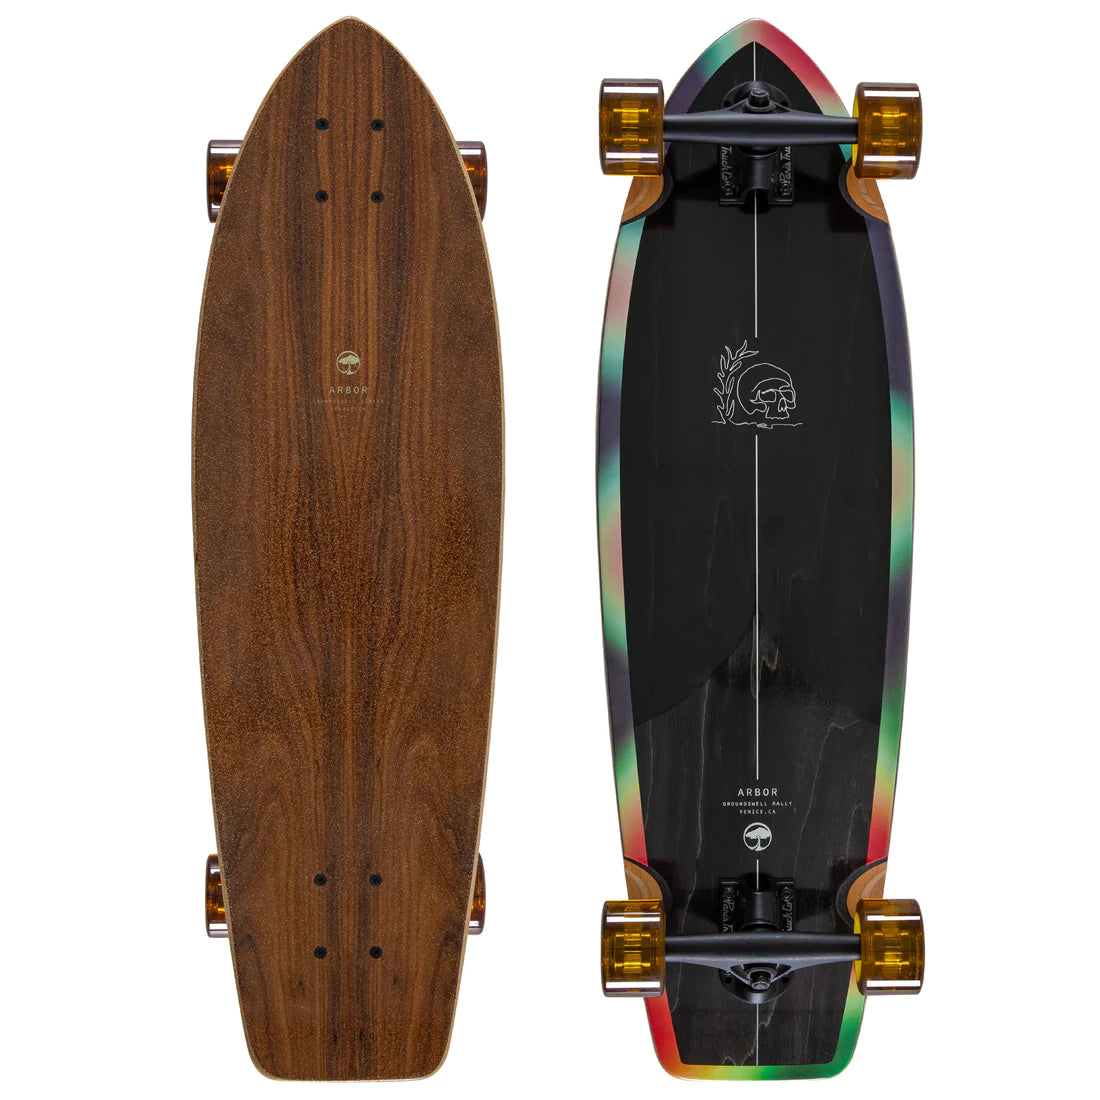 Arbor Groundswell Rally 8.875" x 30.5" Cruiser Complete